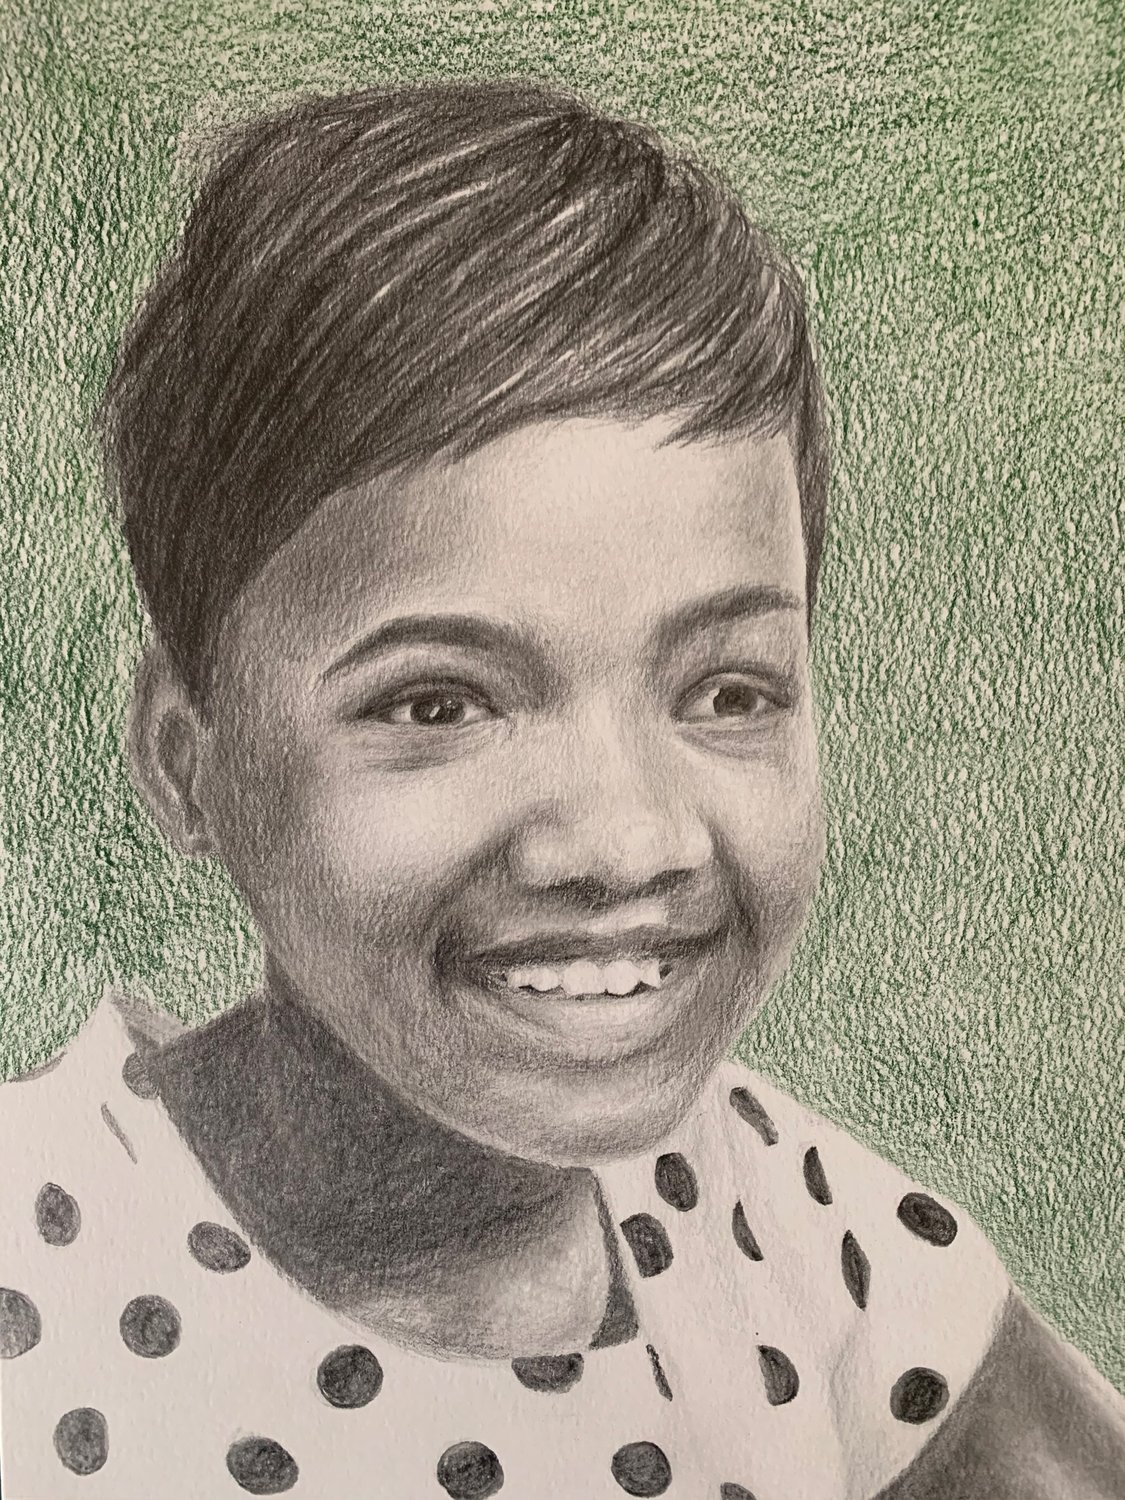 PINKY: Pinky, 12, of India, in graphite and colored pencil, created by Cranston High School East rising senior Mathilda Corcoran, under the direction of Jill Cyr, National Art Honor Society chapter sponsor. Corcoran shared that she found the process of creating the portrait comfortable and relaxing.